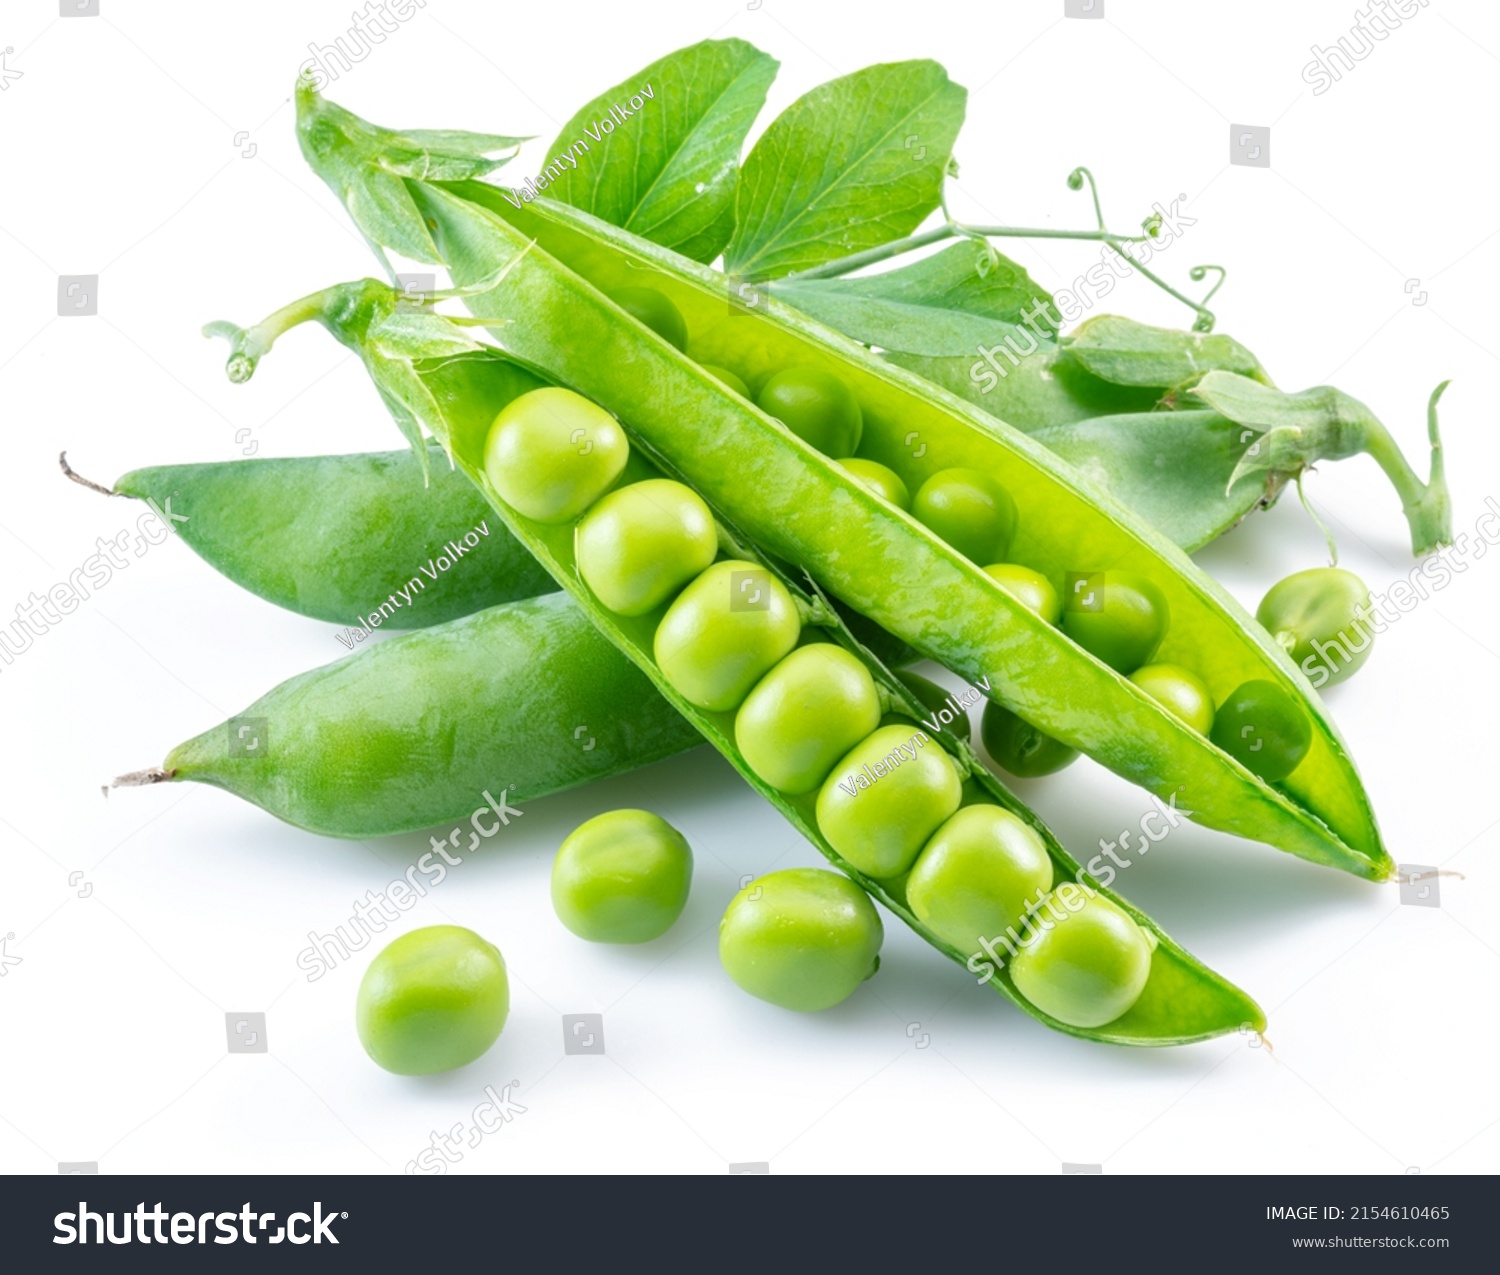 Perfect green peas in pod isolated on white background. #2154610465